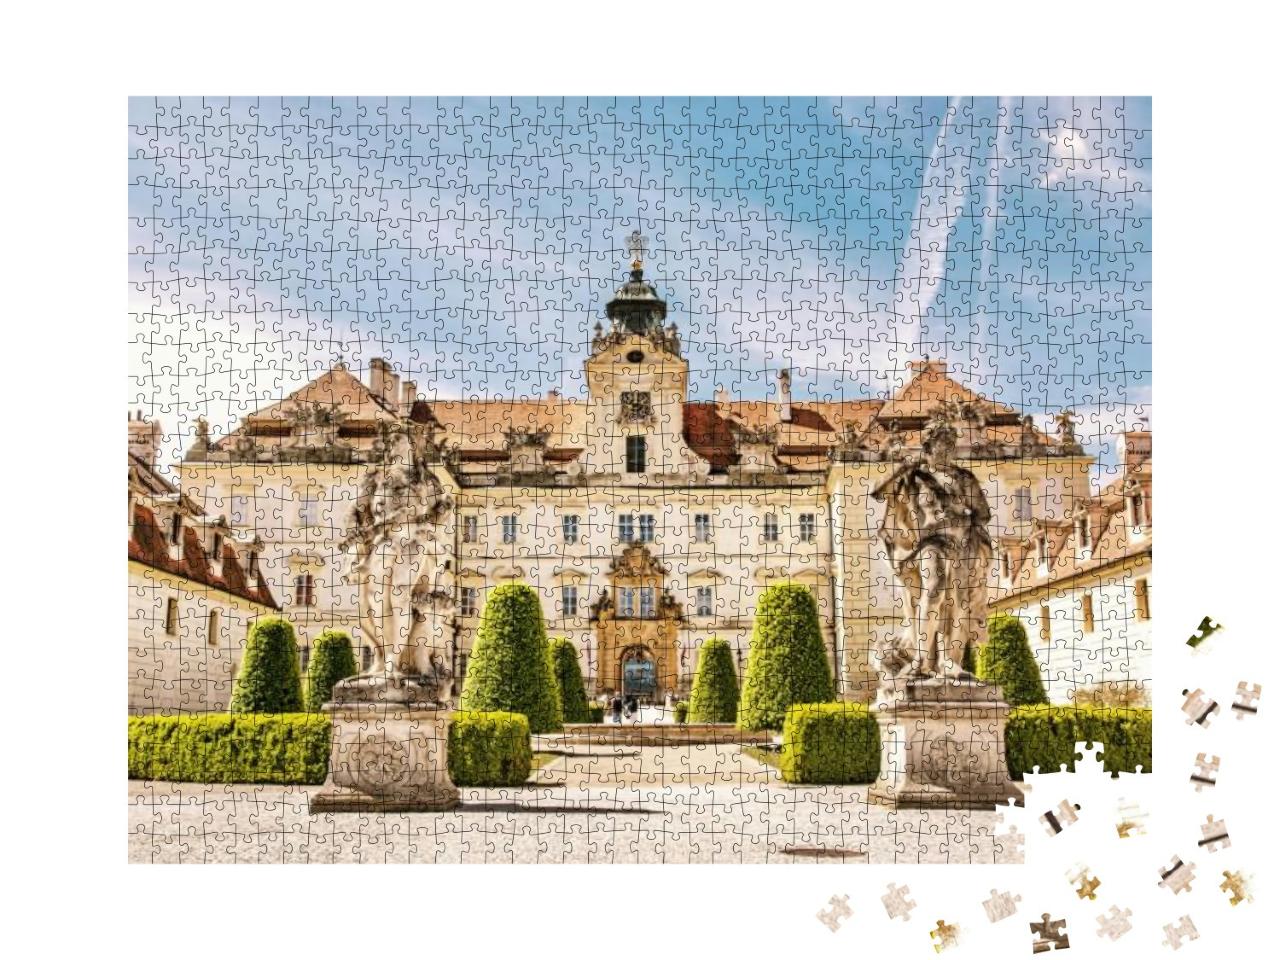 Valtice Contains One of the Most Impressive Baroque Resid... Jigsaw Puzzle with 1000 pieces